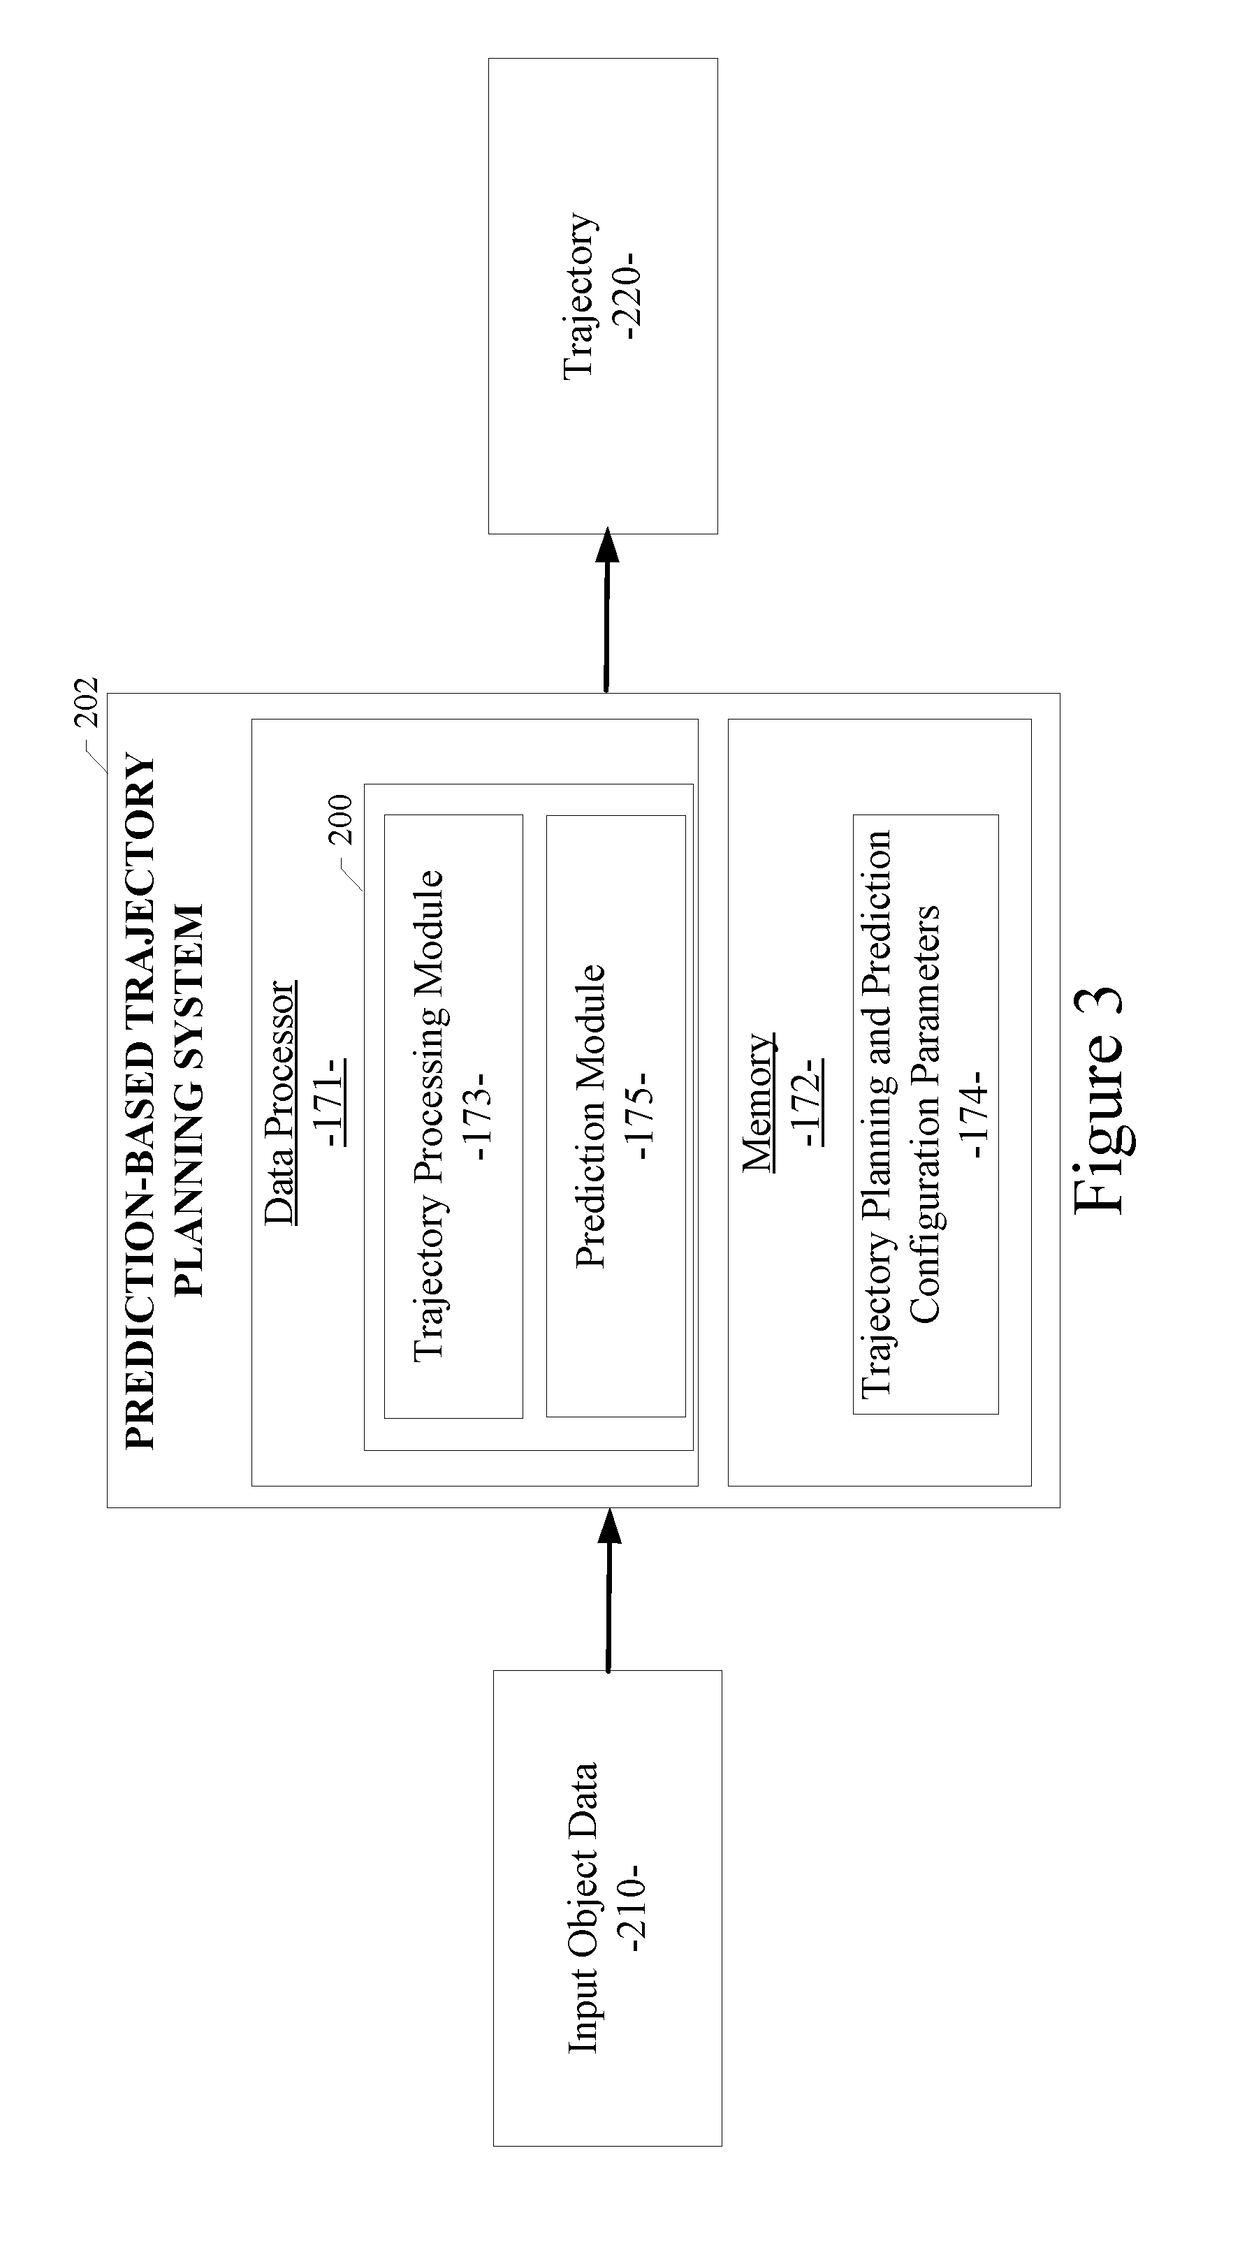 Data-driven prediction-based system and method for trajectory planning of autonomous vehicles